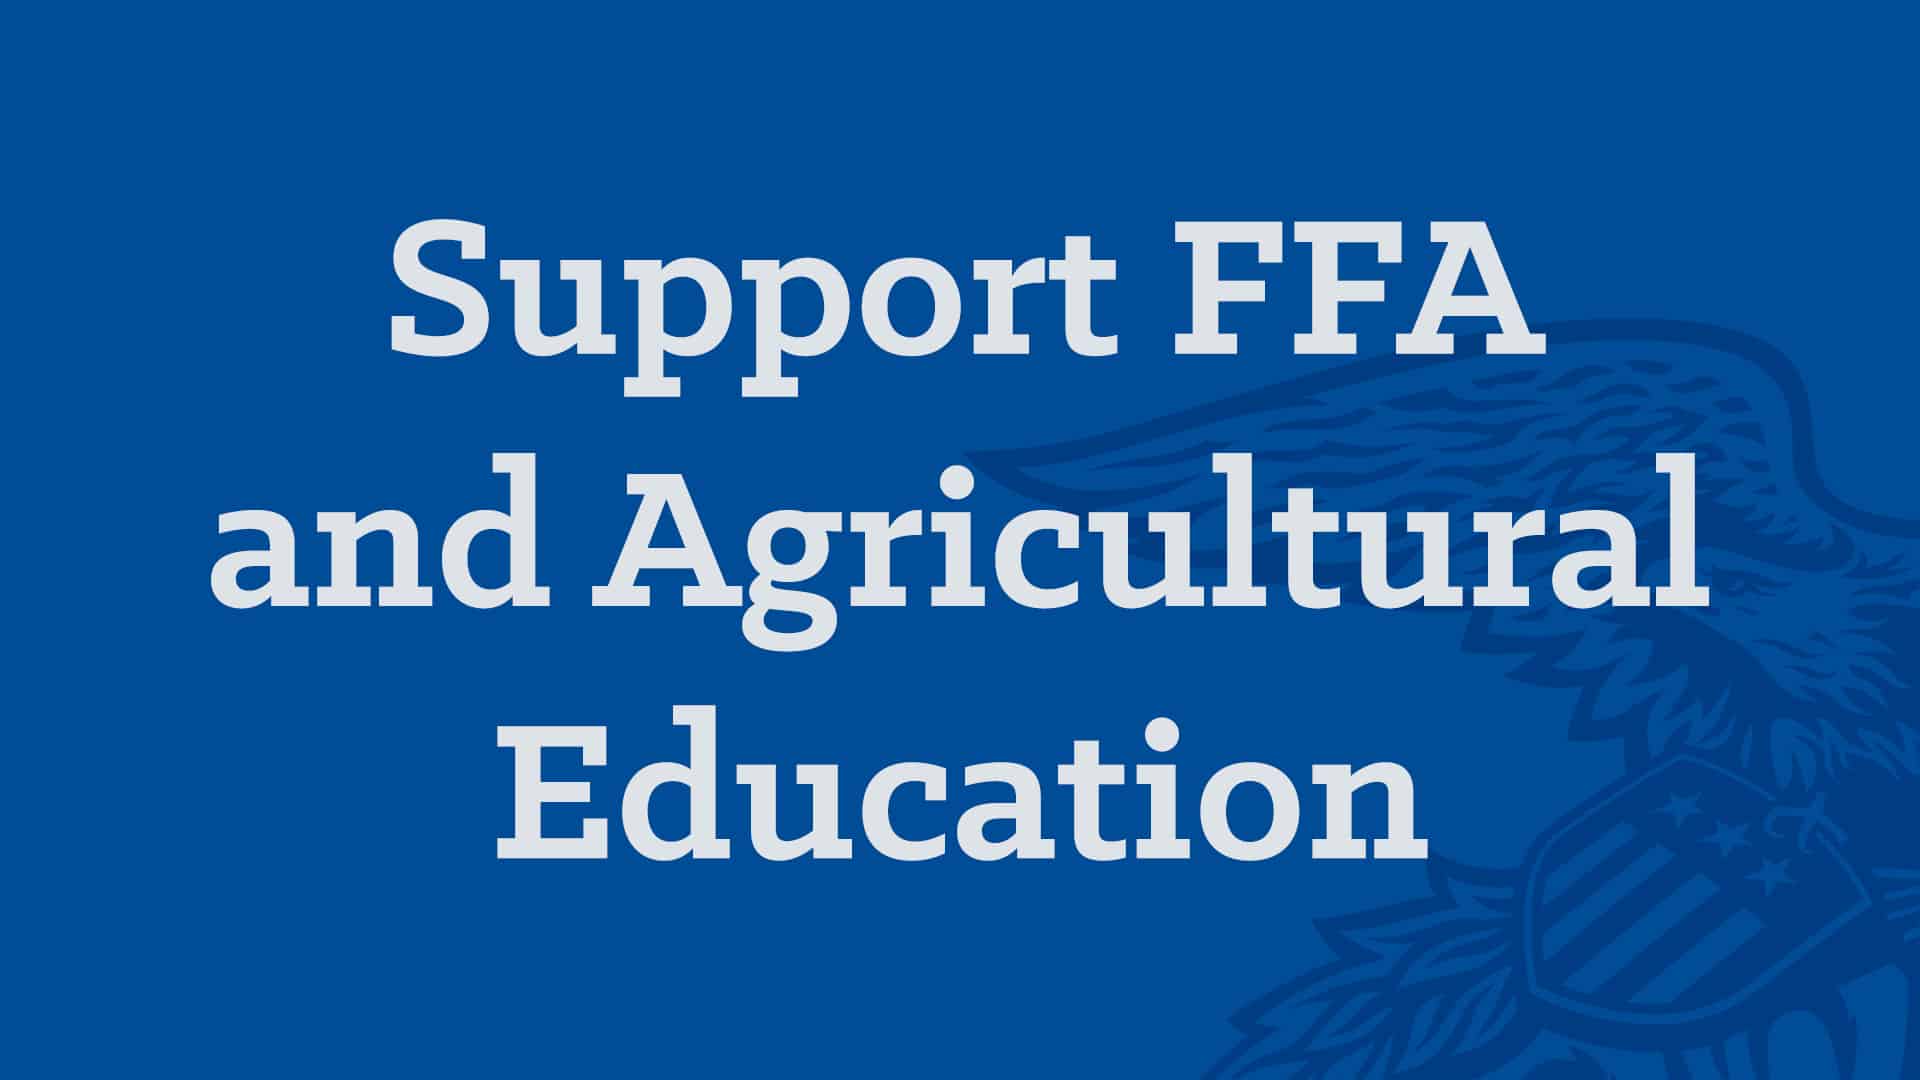 Support FFA and Agricultural Education